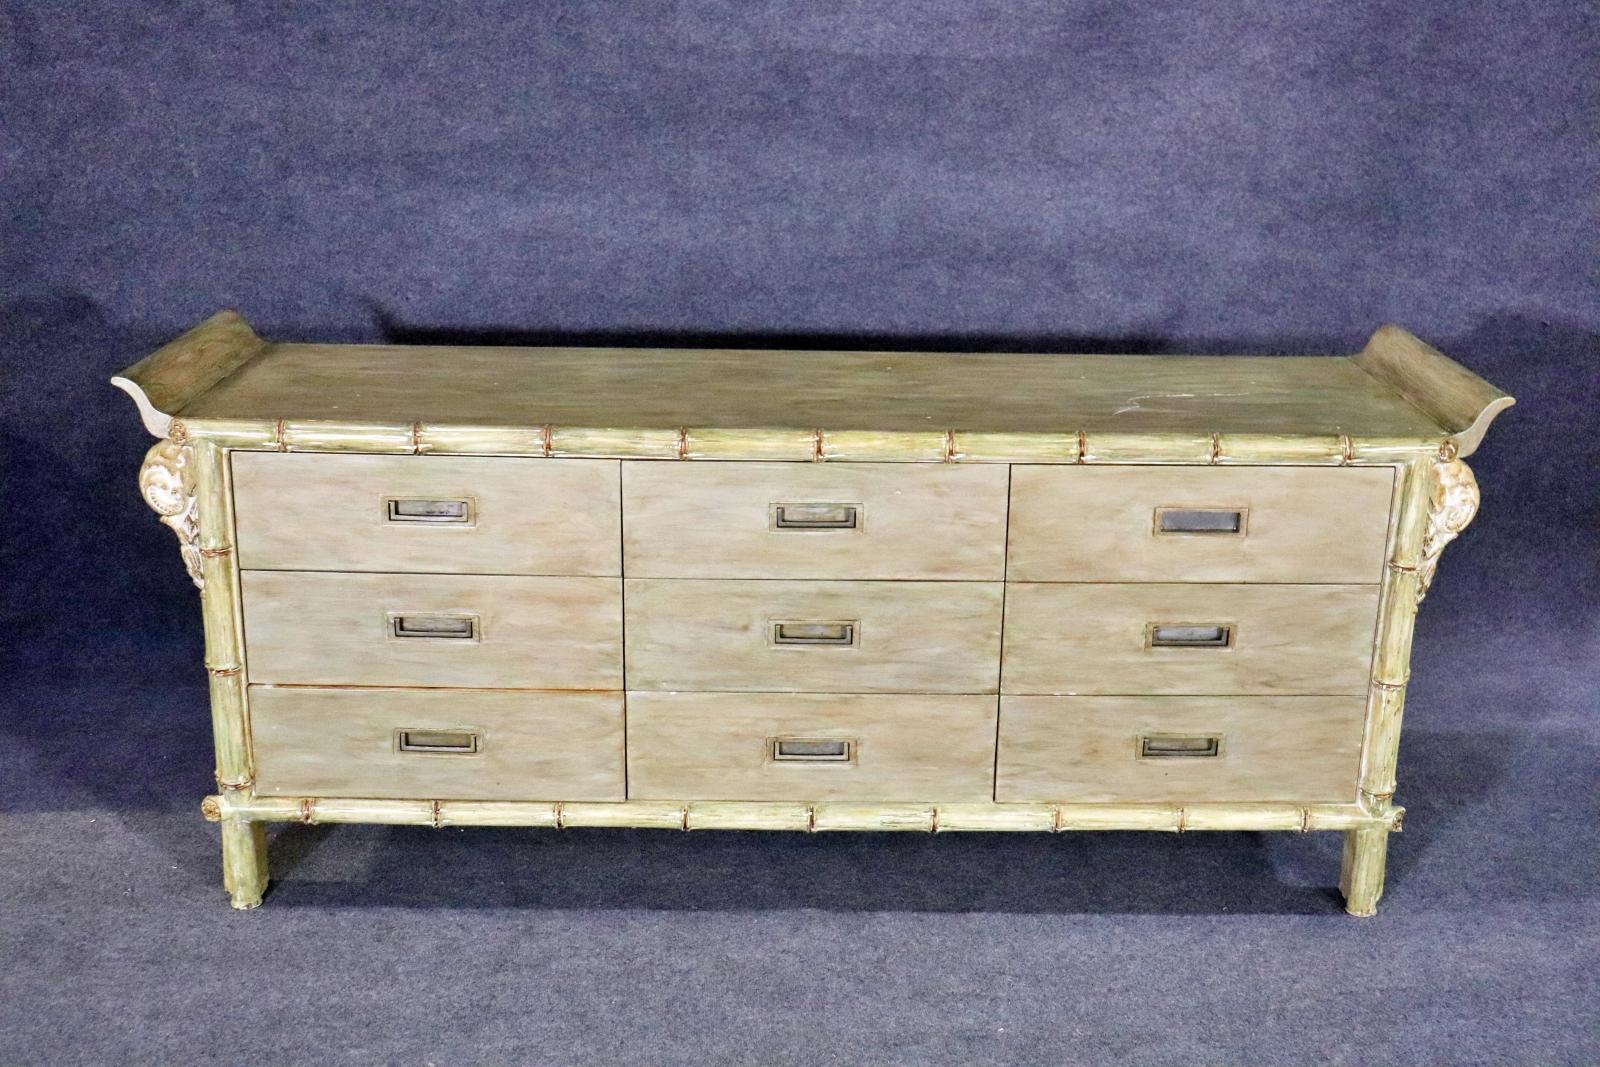 Wood. 9 drawers. Painted. Faux bamboo. Metal hardware. 33 1/2